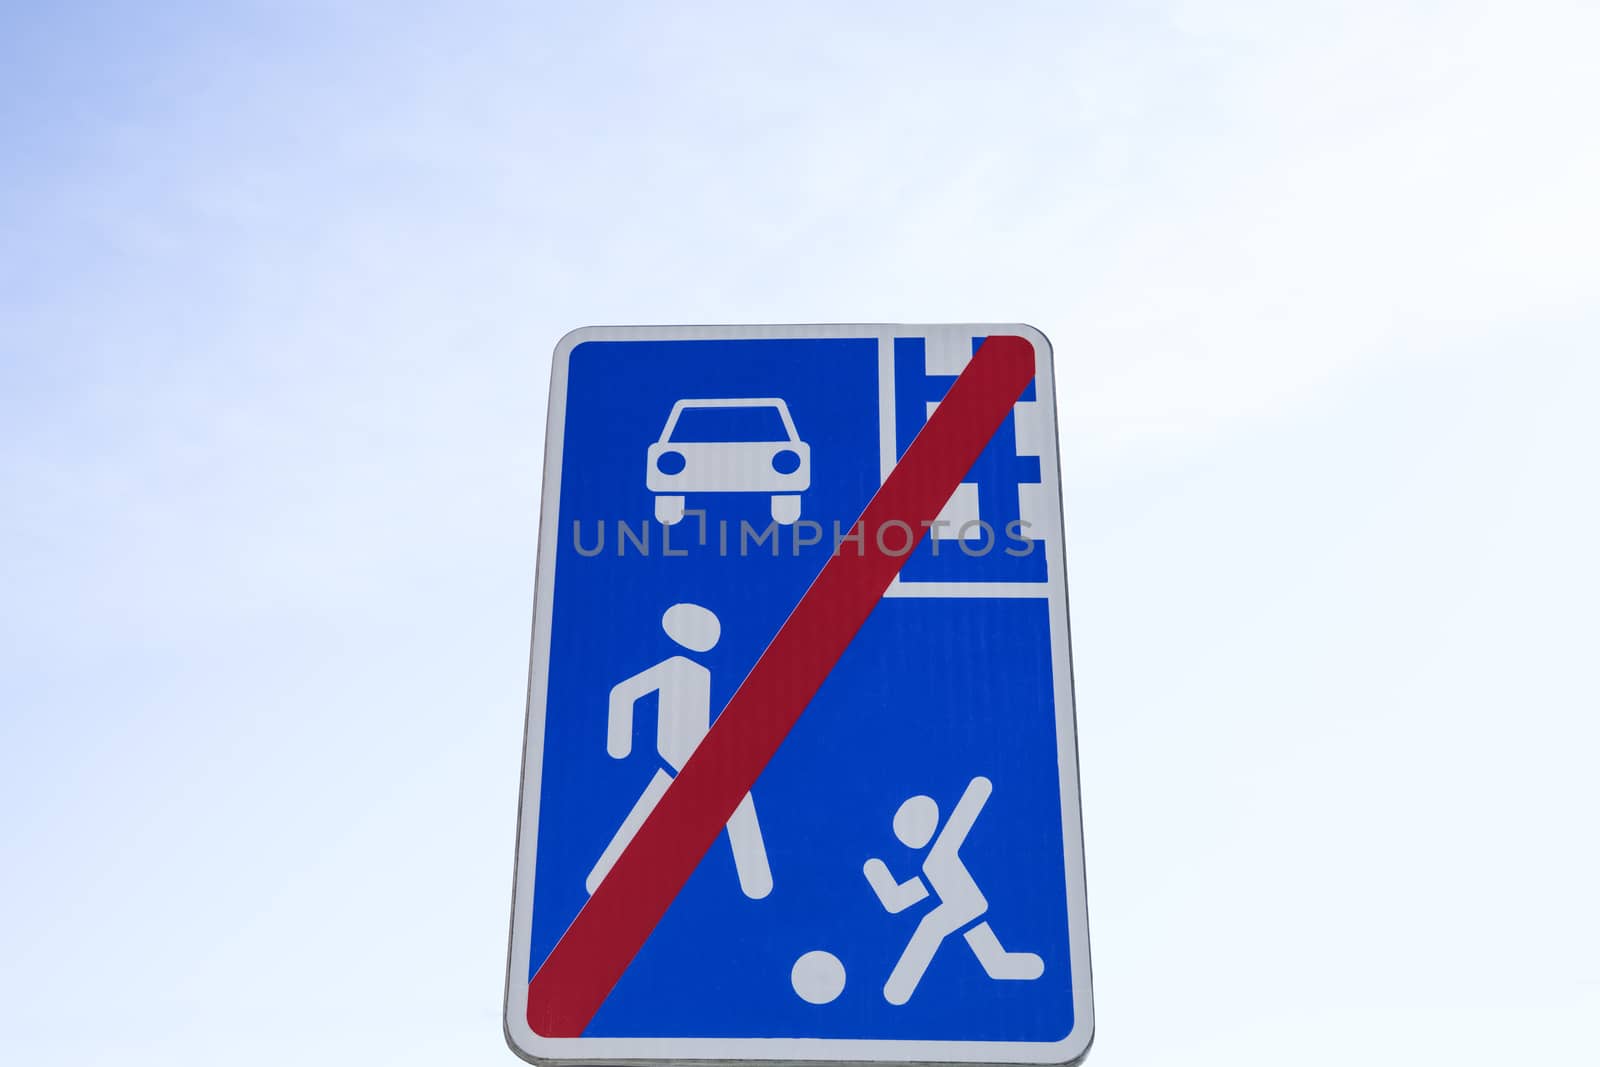 Traffic sign showing a car, a child and an adult by DamantisZ